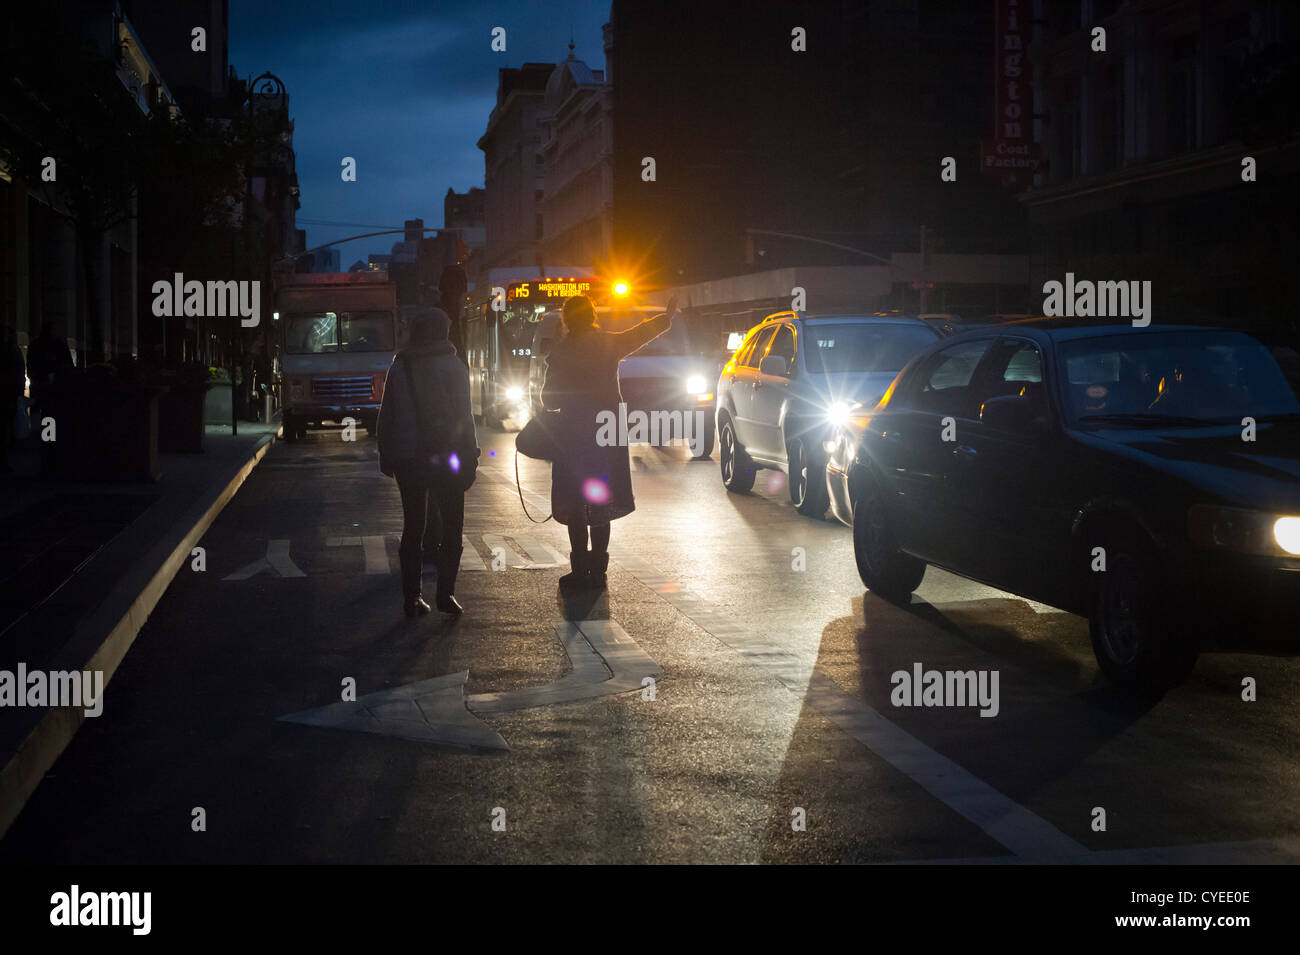 As Night Falls New Yorkers Hail Cabs At An Intersection In Chelsea CYEE0E 